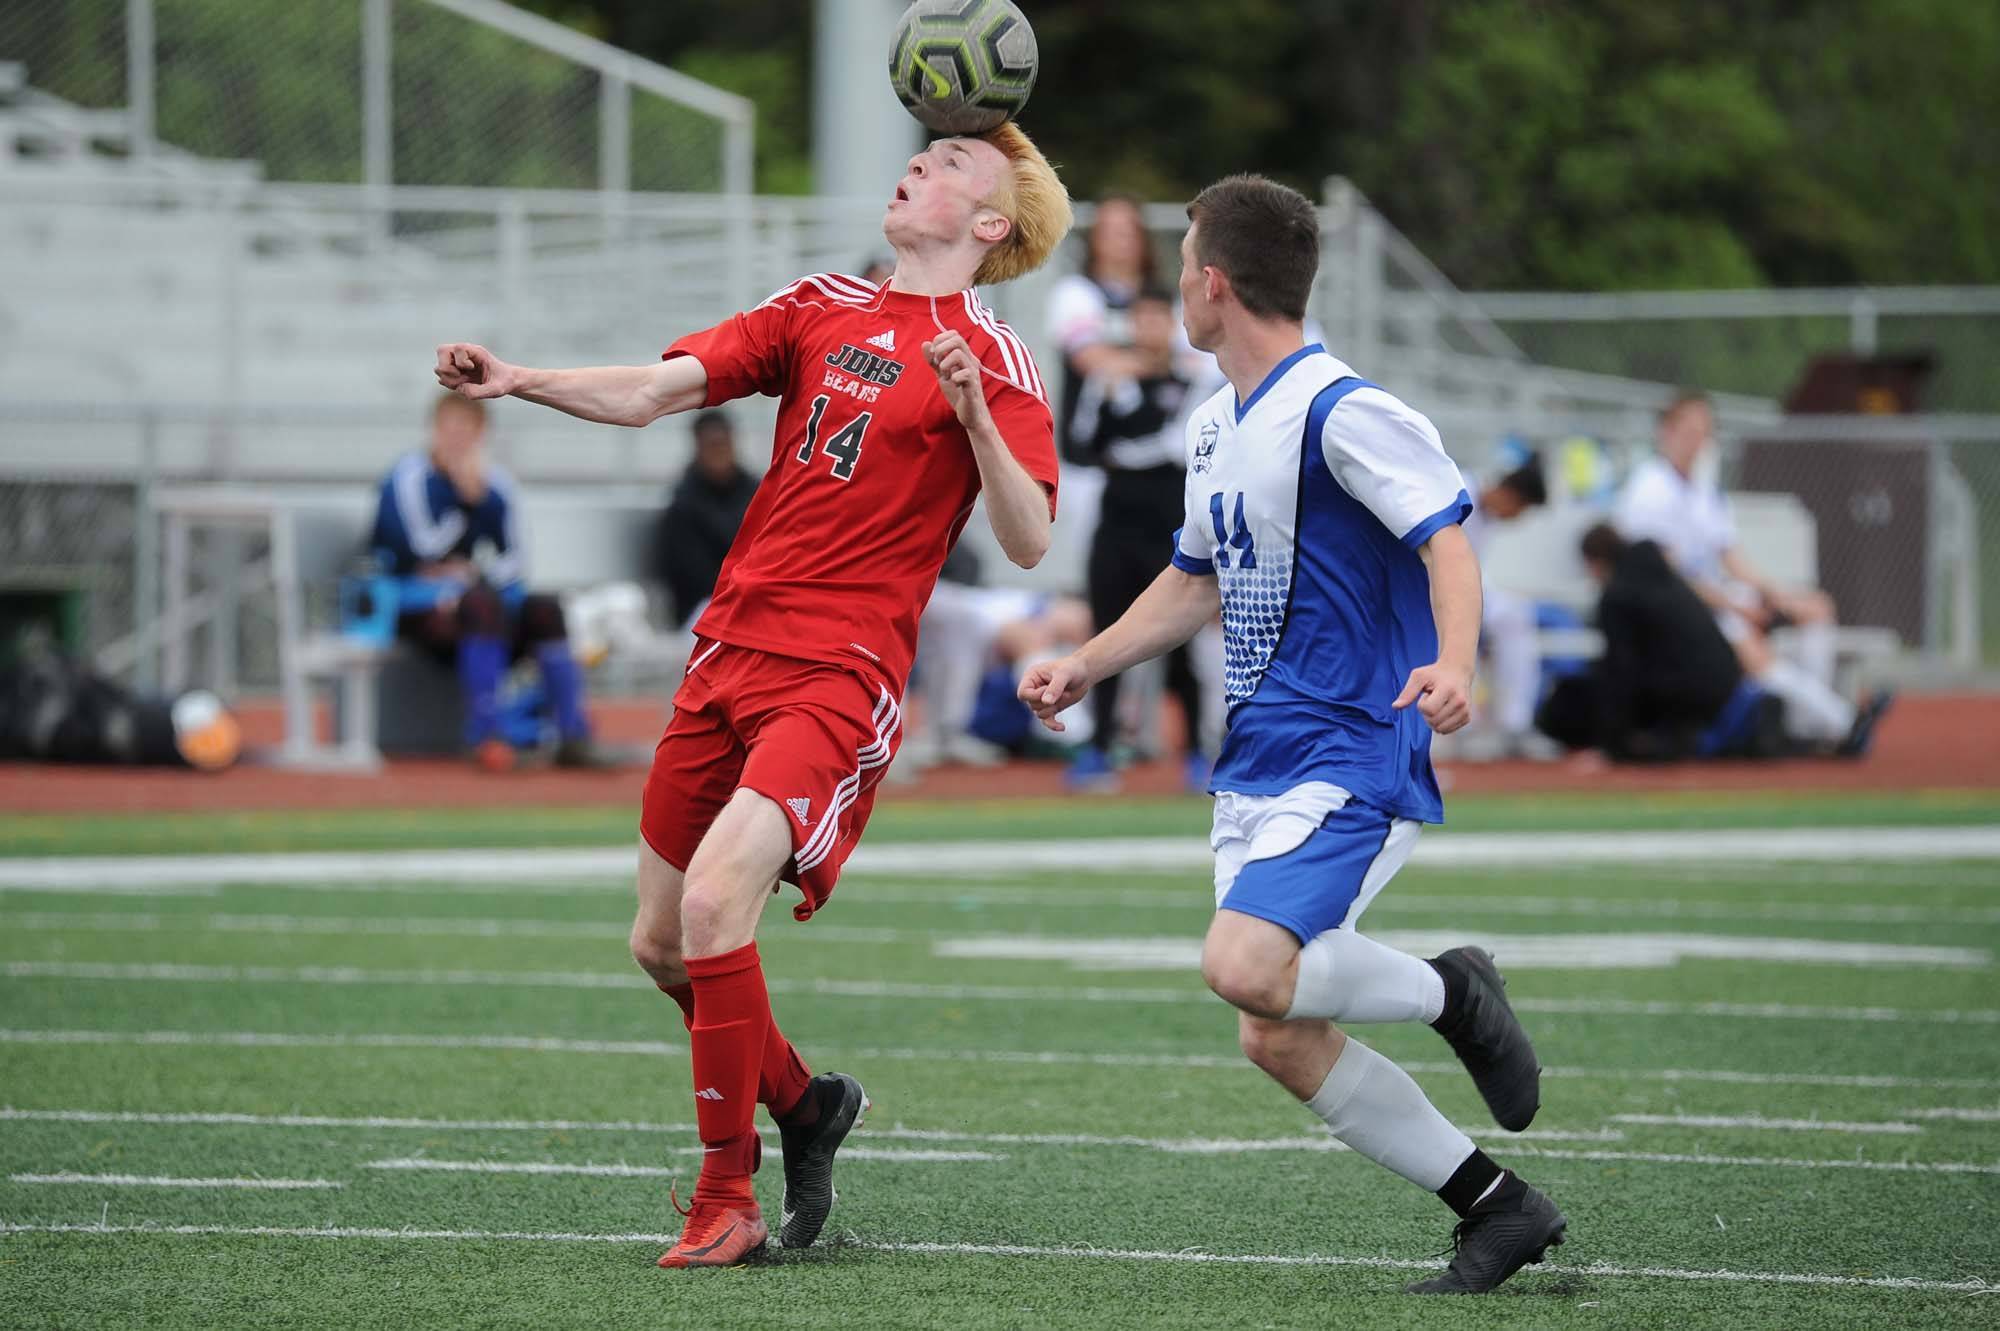 From left, Juneau-Douglas’ Kanon Goetz heads the ball as Palmer’s Ian Roberts looks on during the first half of their ASAA/First National Bank Alaska soccer state championship match Thursday evening at Service High School in Anchorage. (Michael Dinneen | For the Juneau Empire)